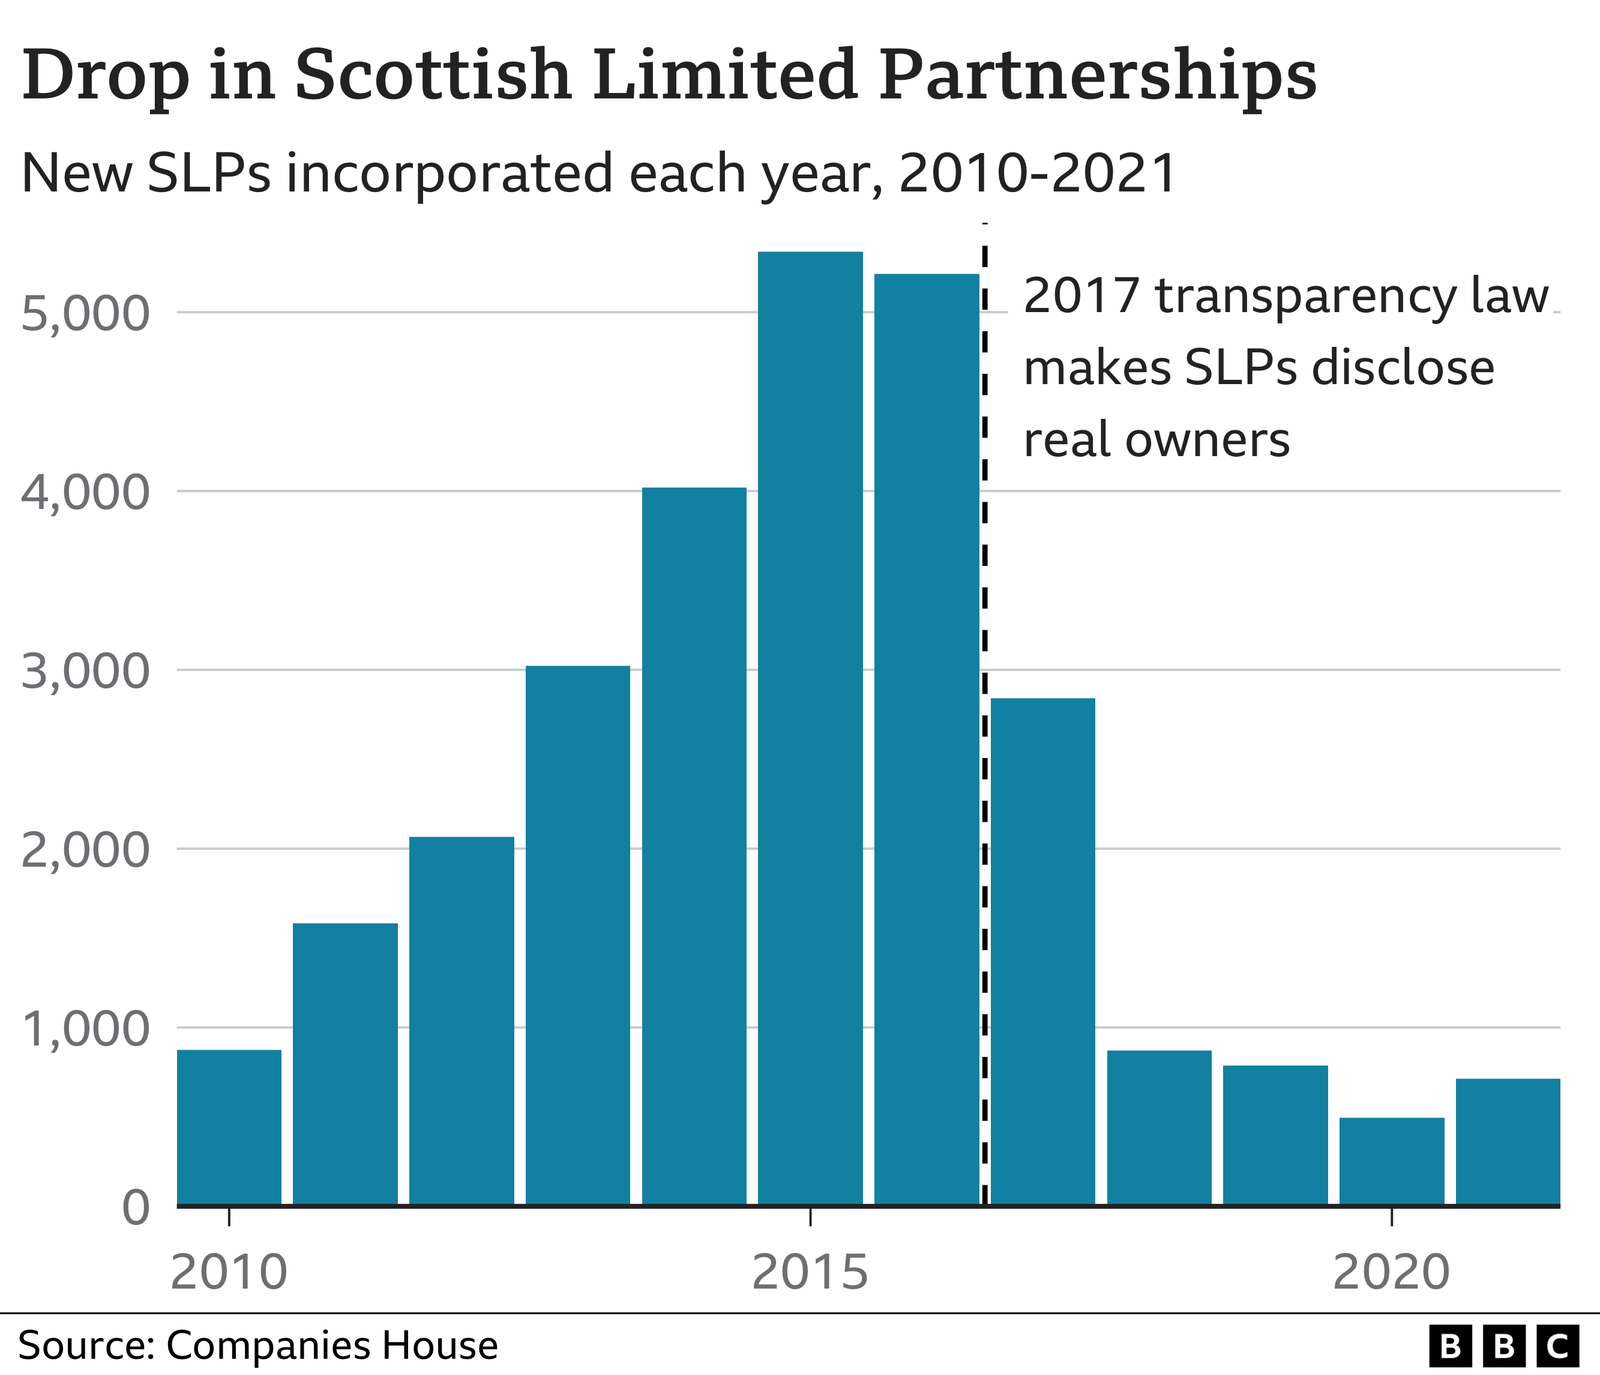 Drop in Scottish Limited Partnerships